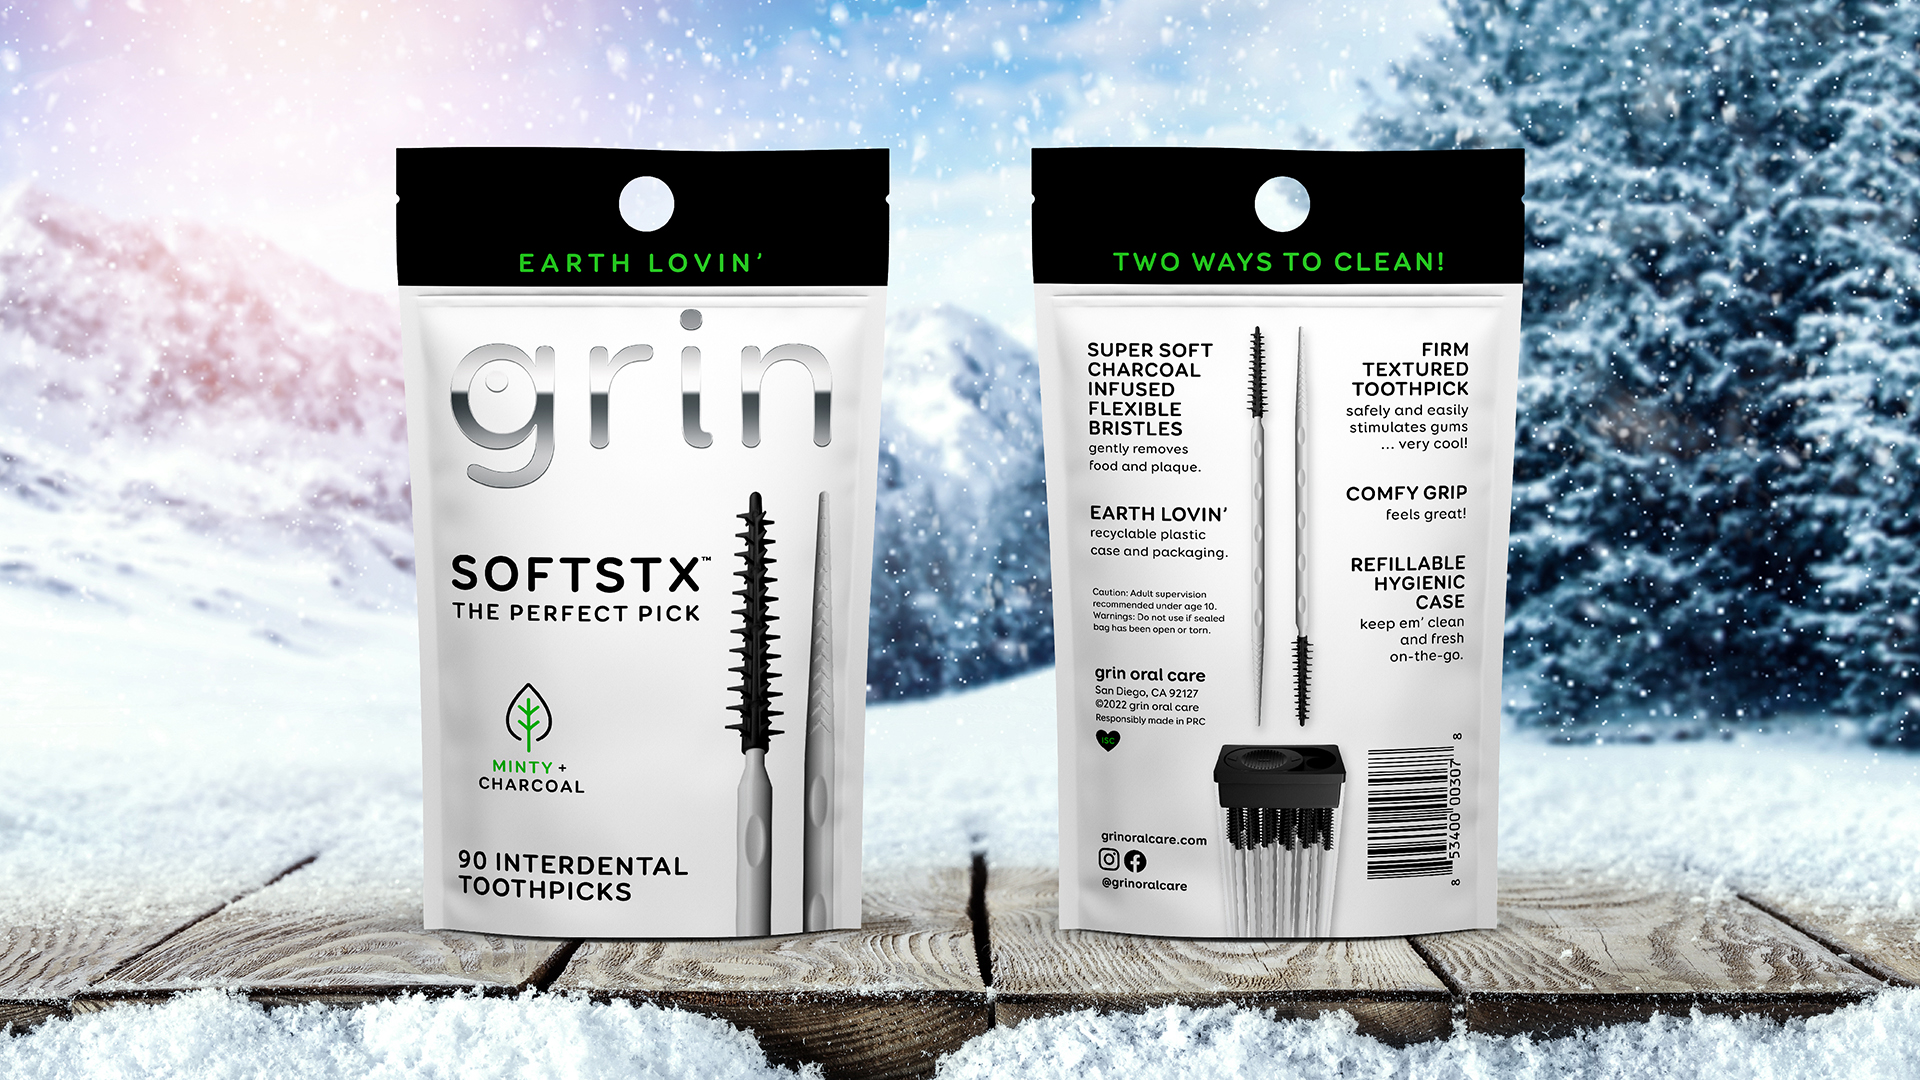 Grin Oral Care Minty Charcoal Softstx Photography